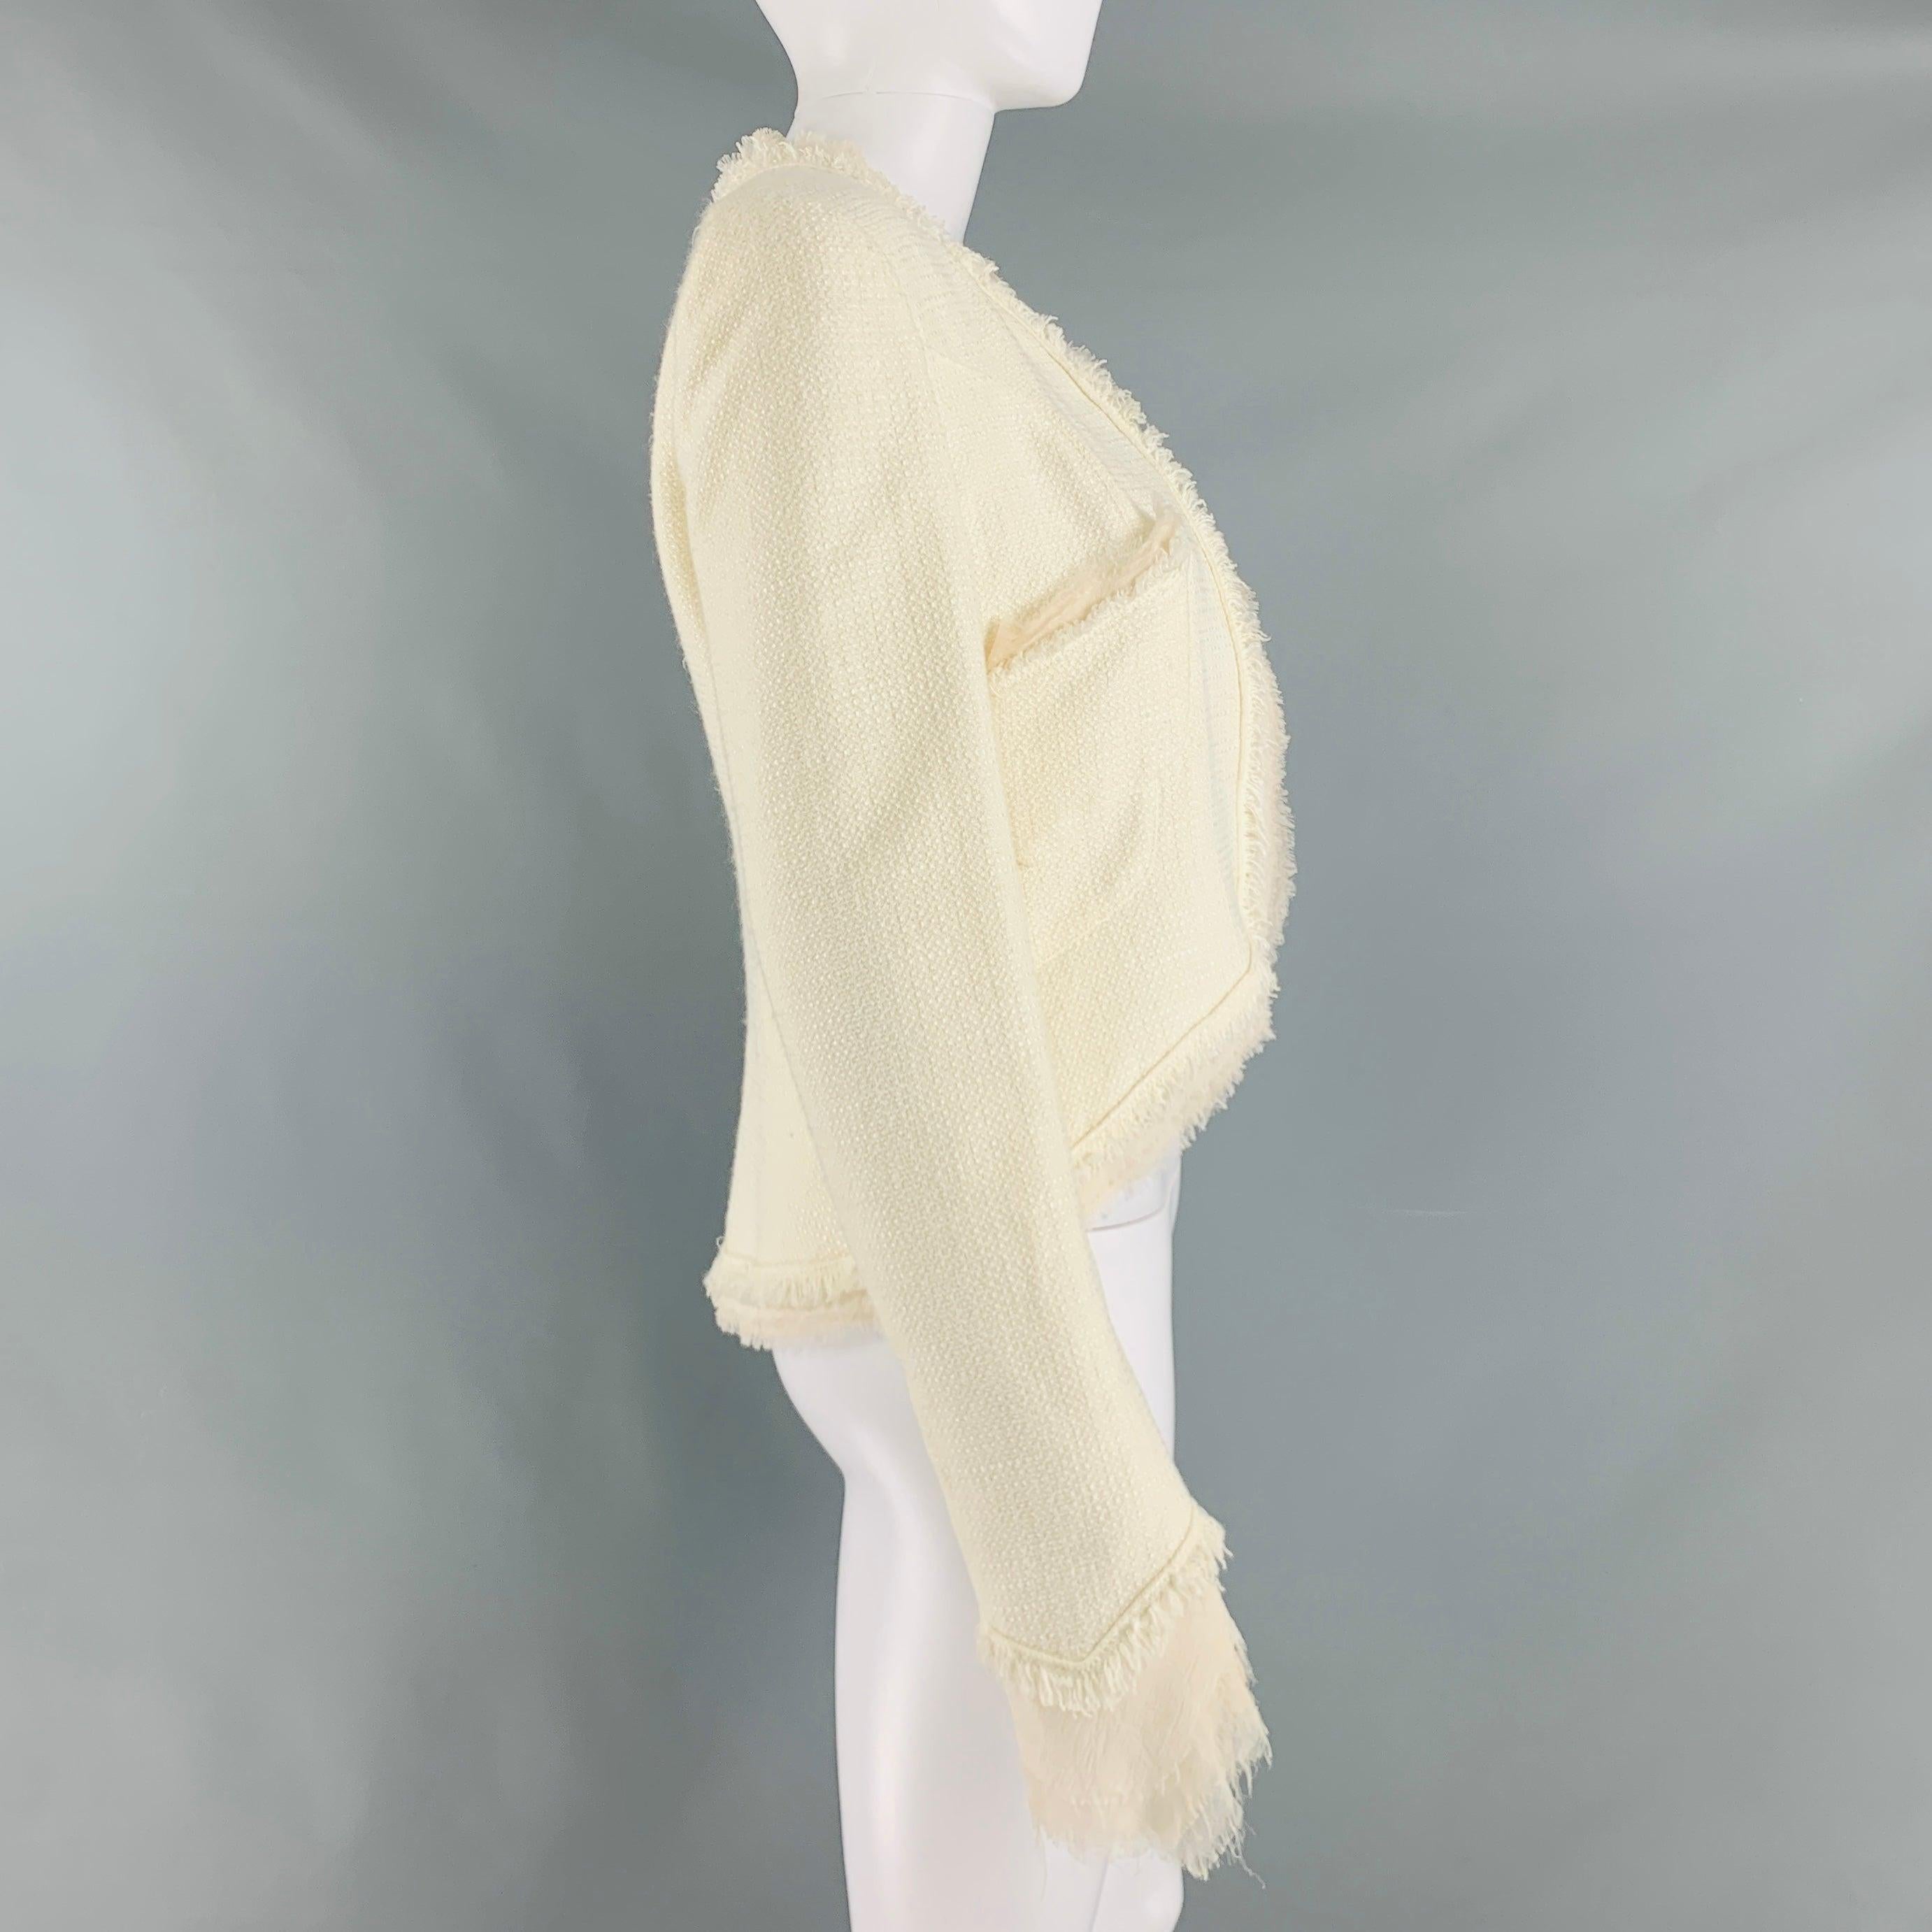 CHANEL 2004 jacket comes in a cream cotton acrylic featuring a raw edge, chiffon trim, two patch pockets, and an open front design. Made in France.Very Good Pre-Owned Condition. Very faint marks at front. 

Marked:   FR 40Shoulder: 15 inches Bust: